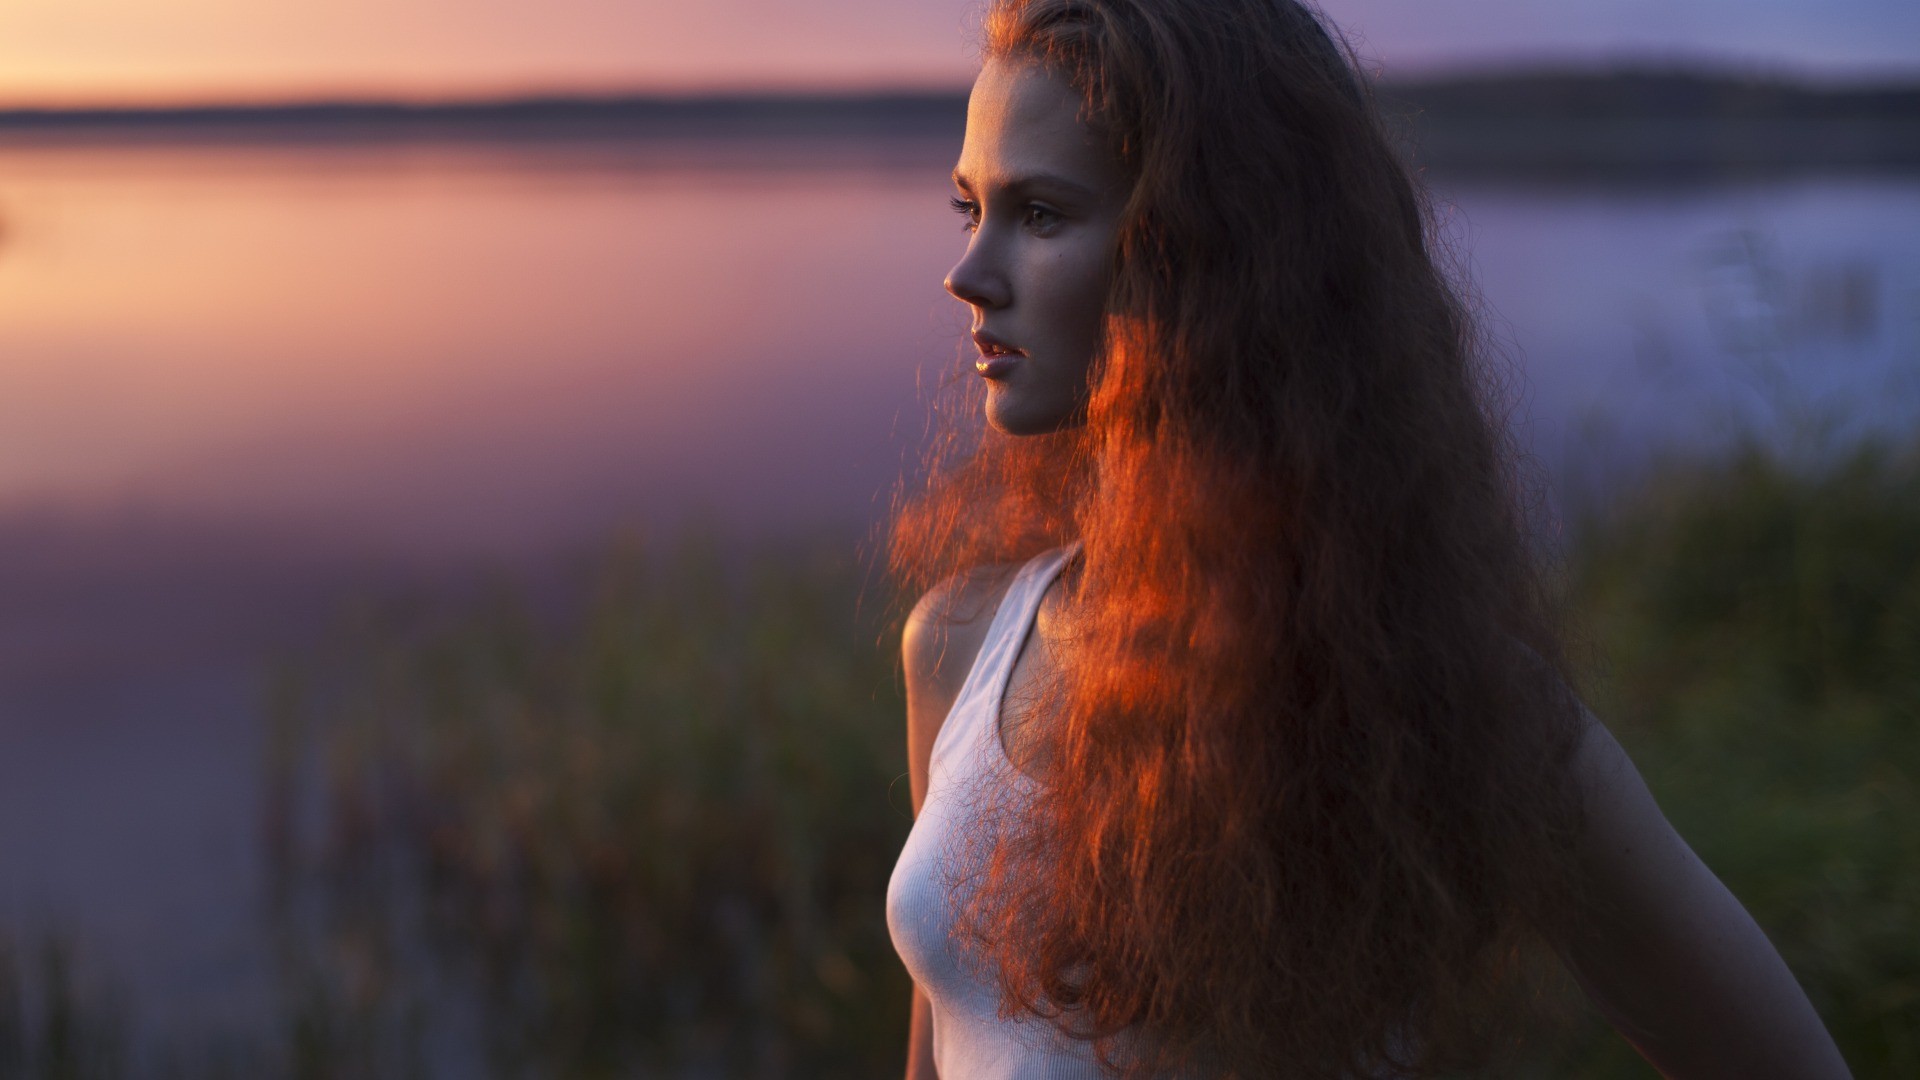 People 1920x1080 women lake sunlight looking away redhead model long hair women outdoors outdoors face looking into the distance